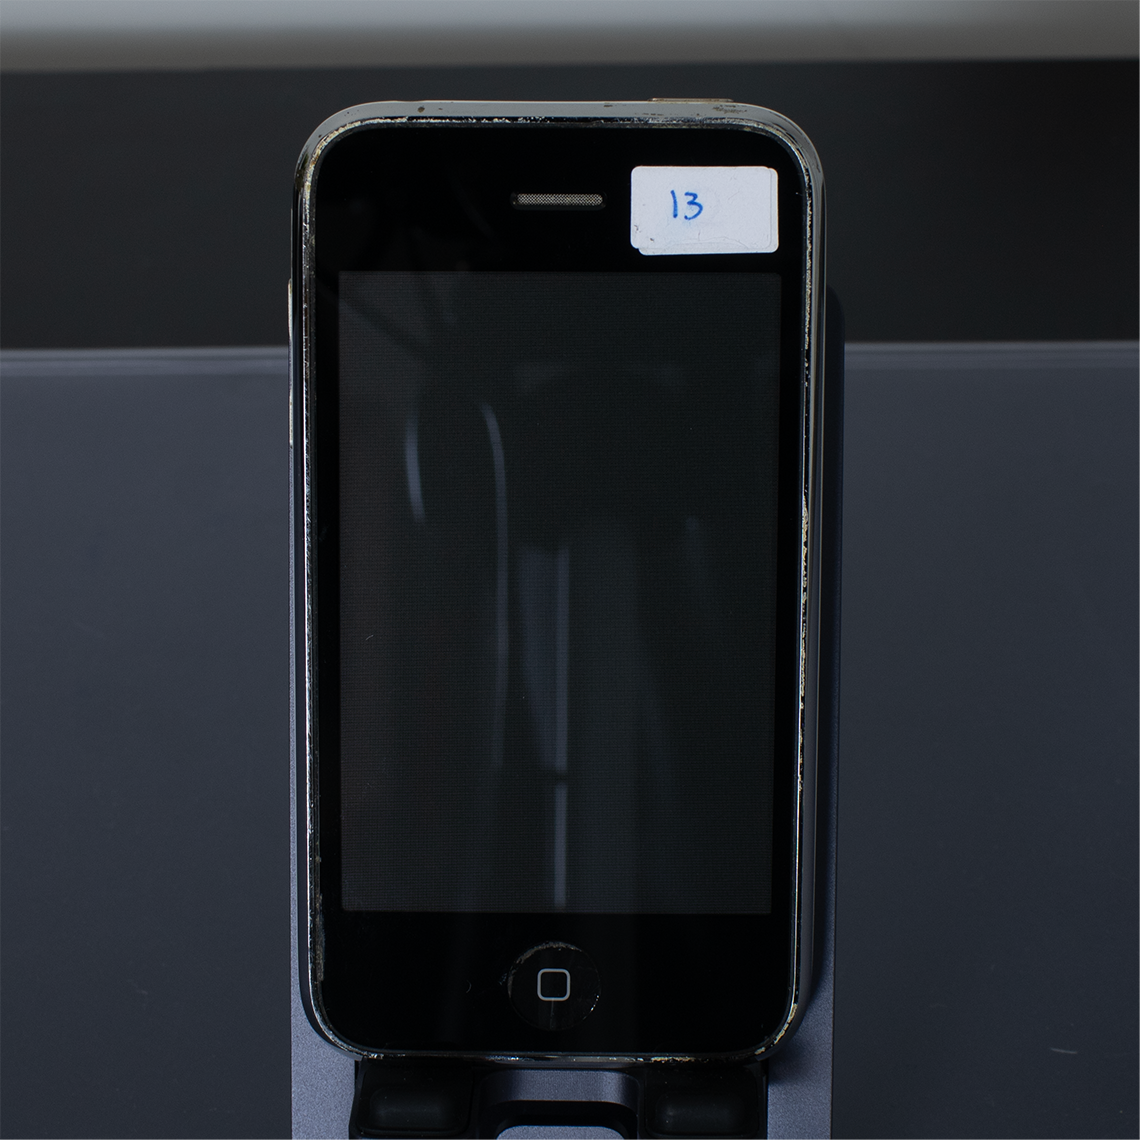 iPhone 3G - 16GB - iOS 4.2.1 - Locked (AT&T) - Good condition